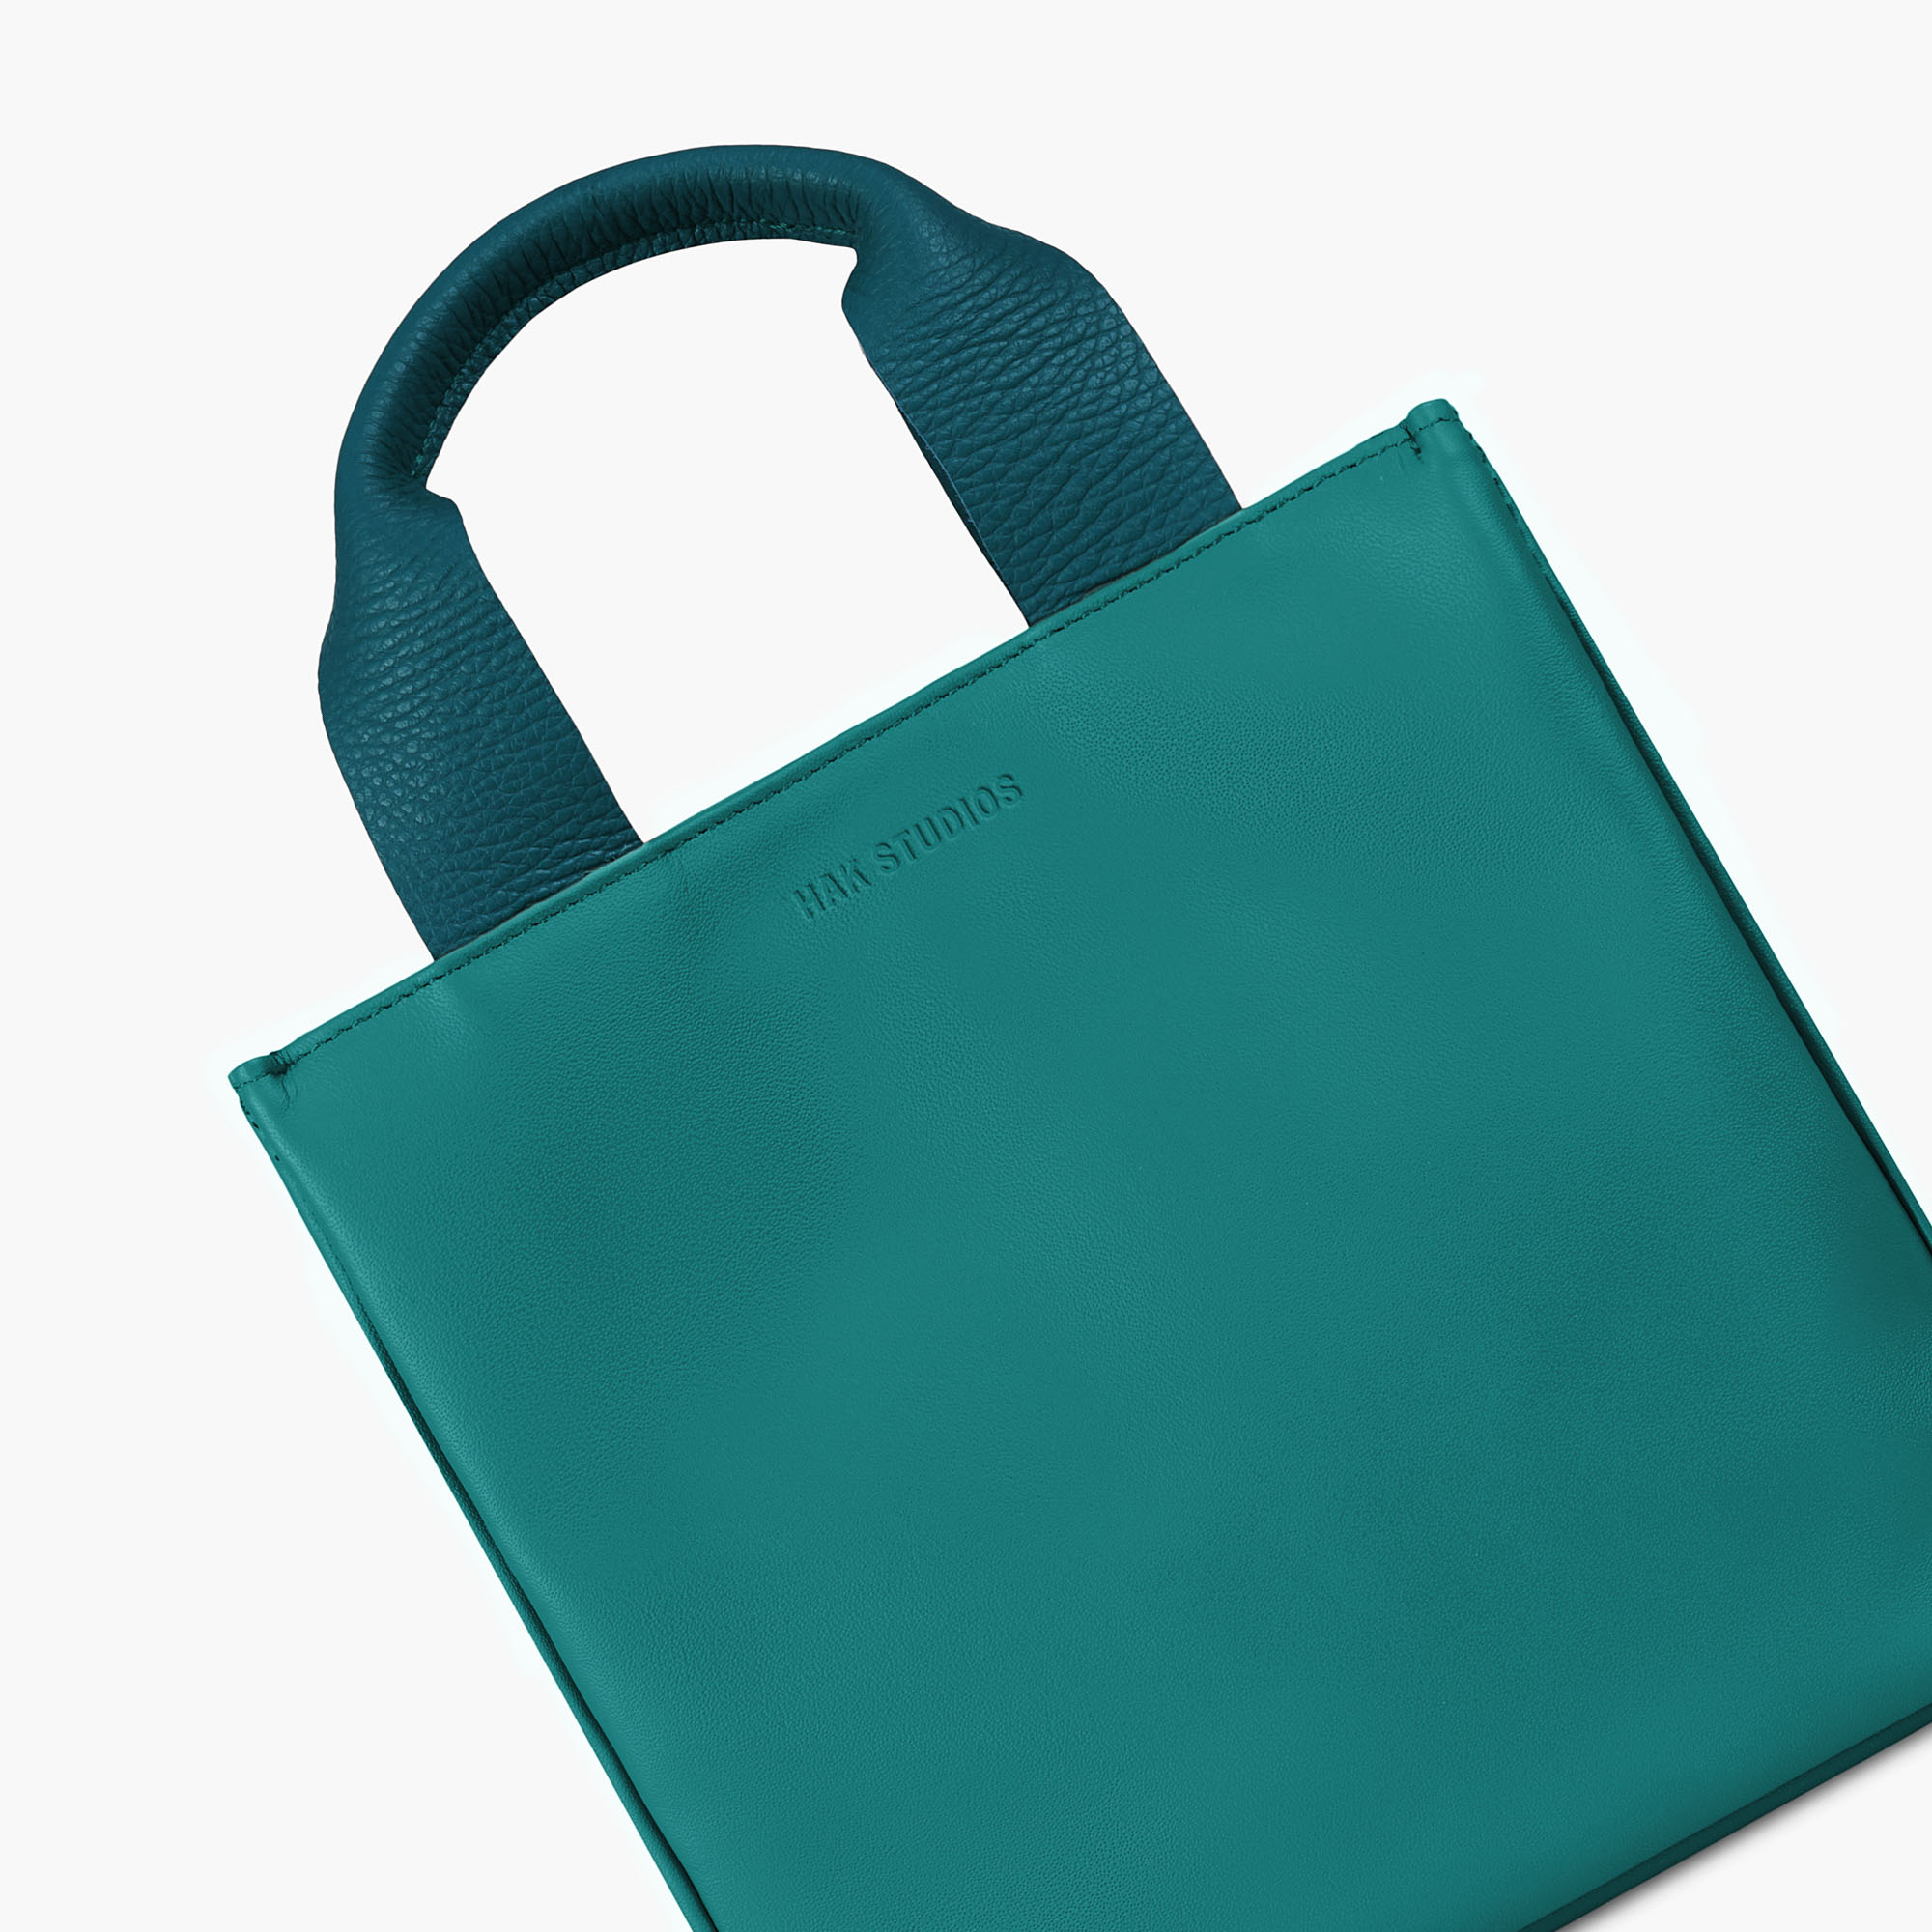 Small leather tote bag in blue color